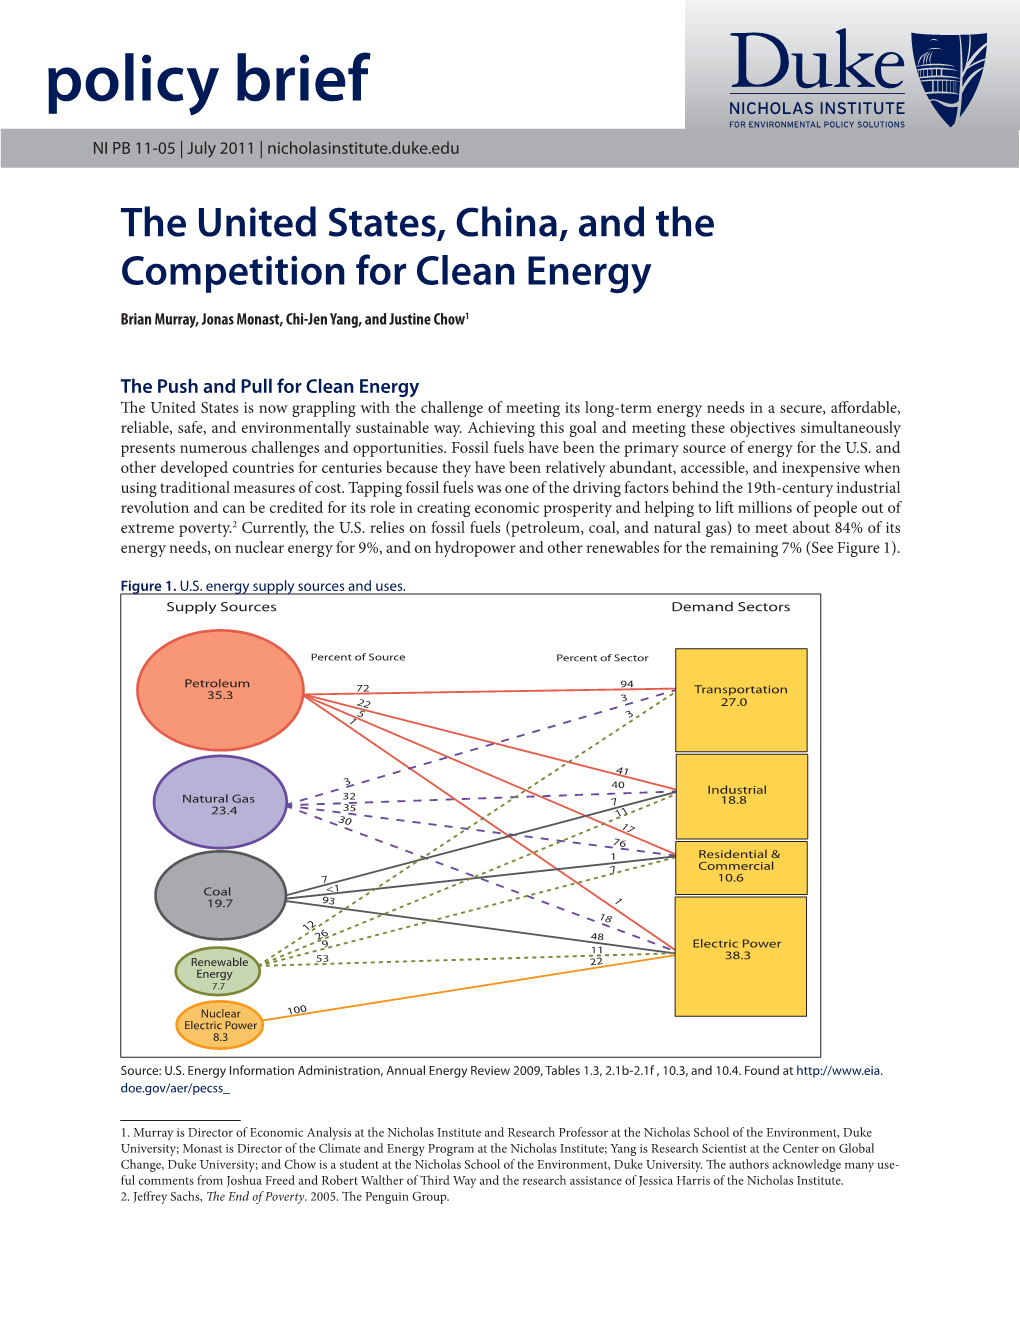 The United States, China, and the Competition for Clean Energy